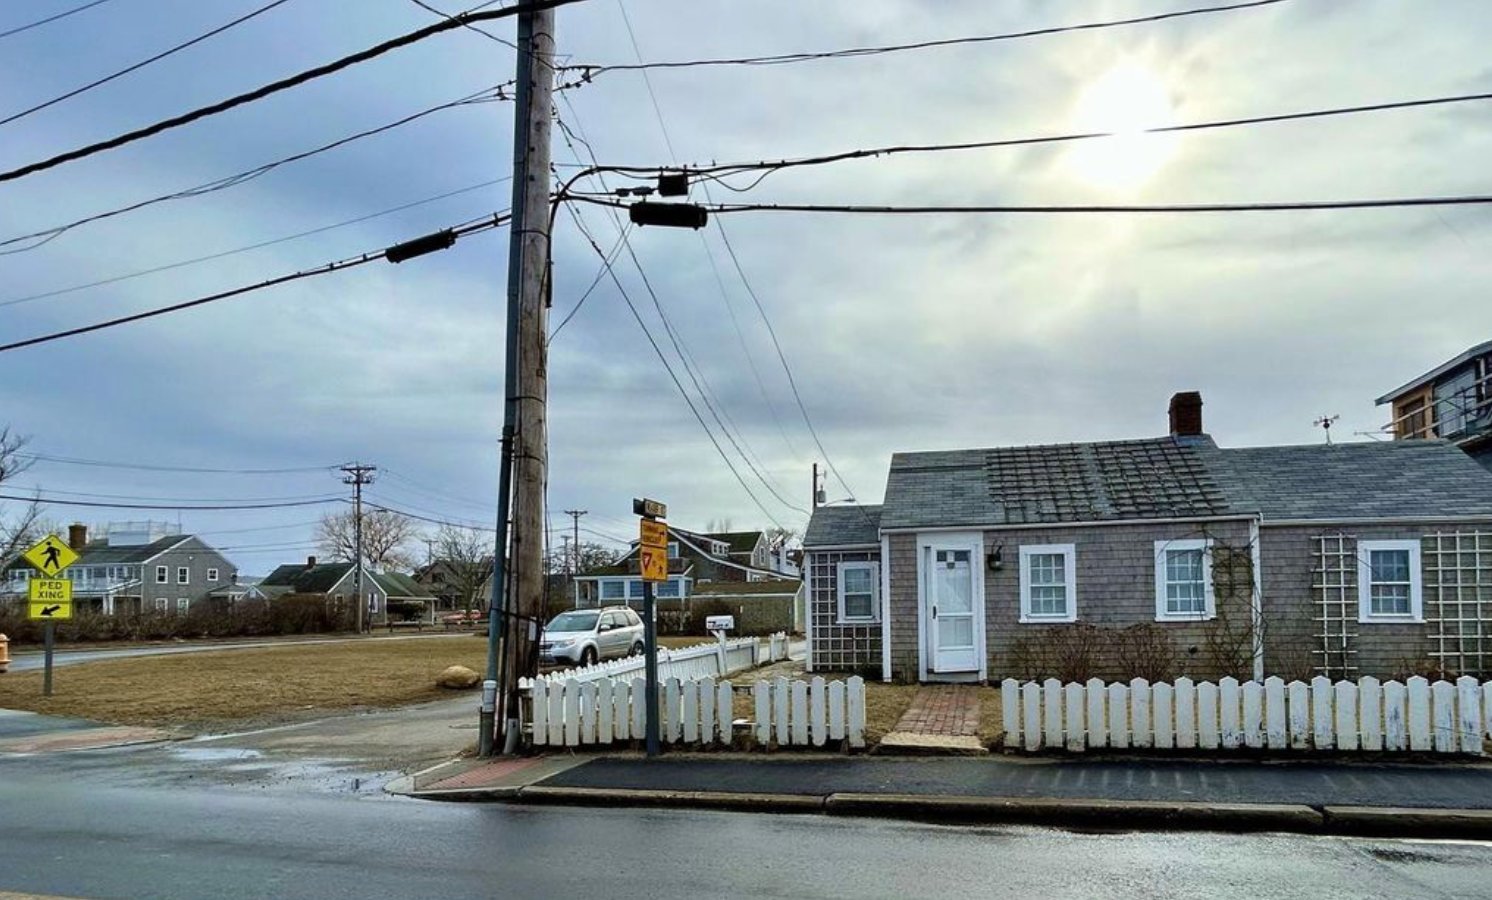 The Land Bank on Wednesday paid $1.6 million for this property on Meader Street across from Nantucket Harbor.